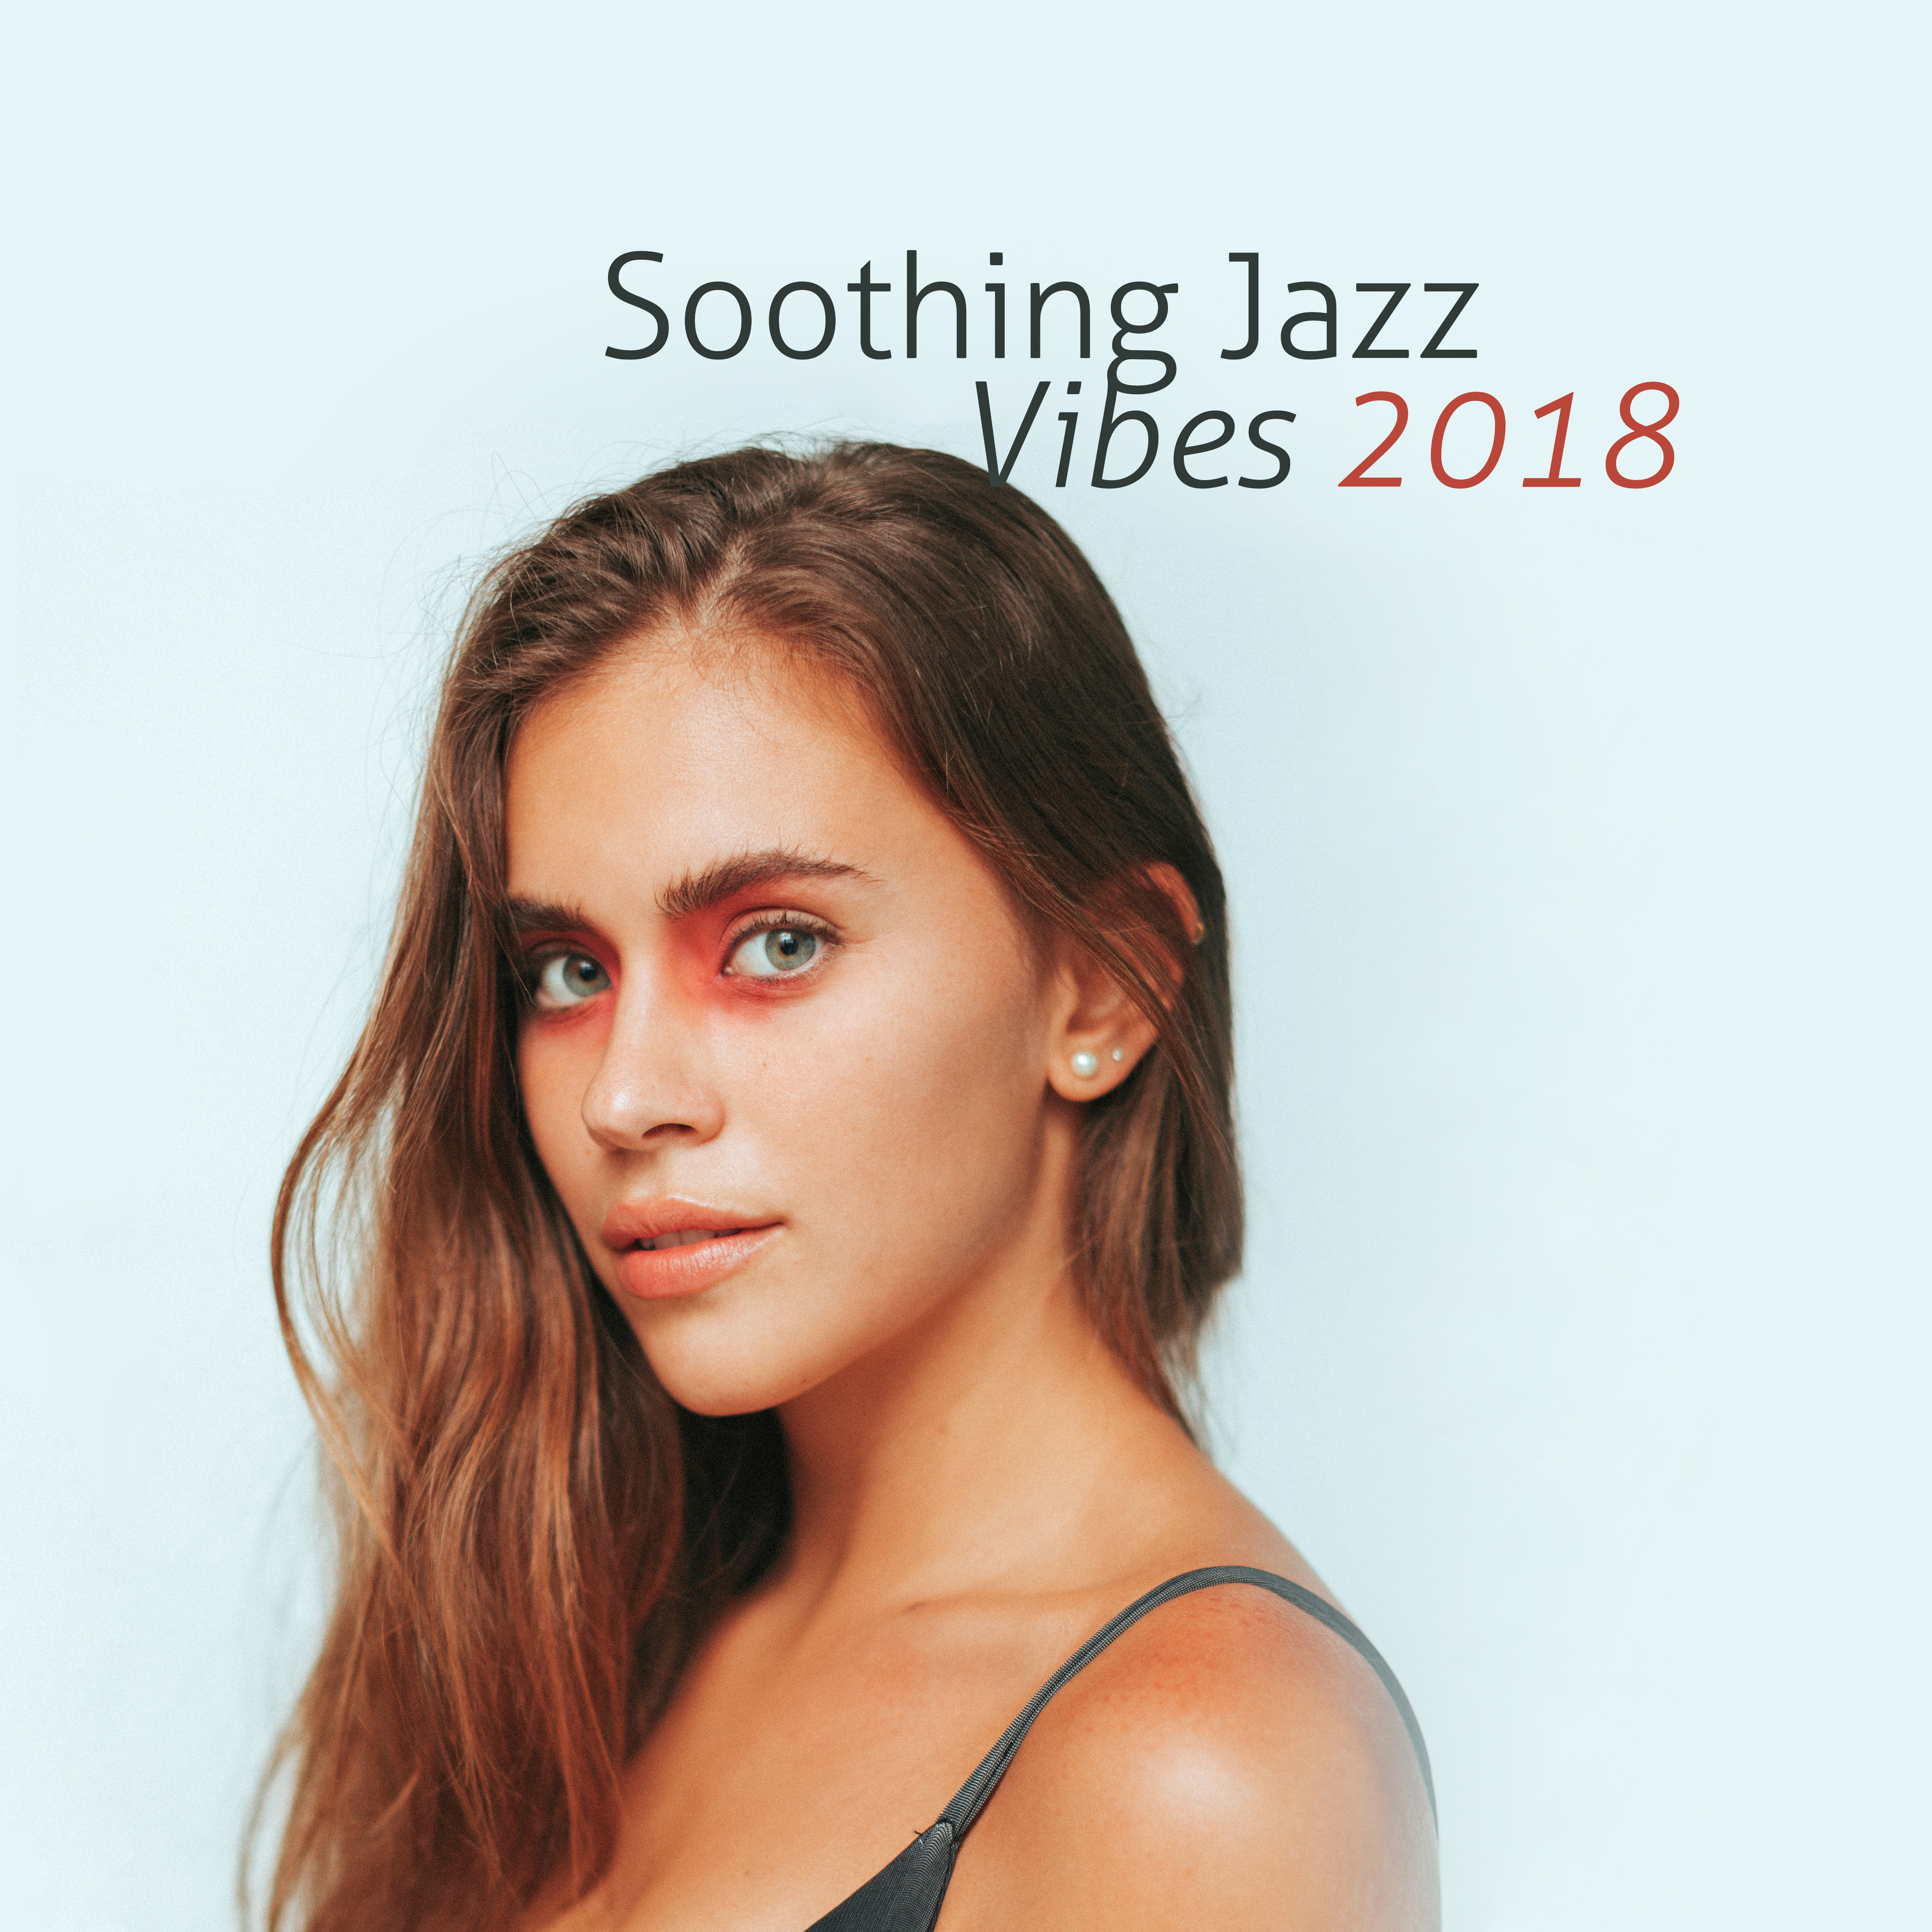 Soothing Jazz Vibes 2018